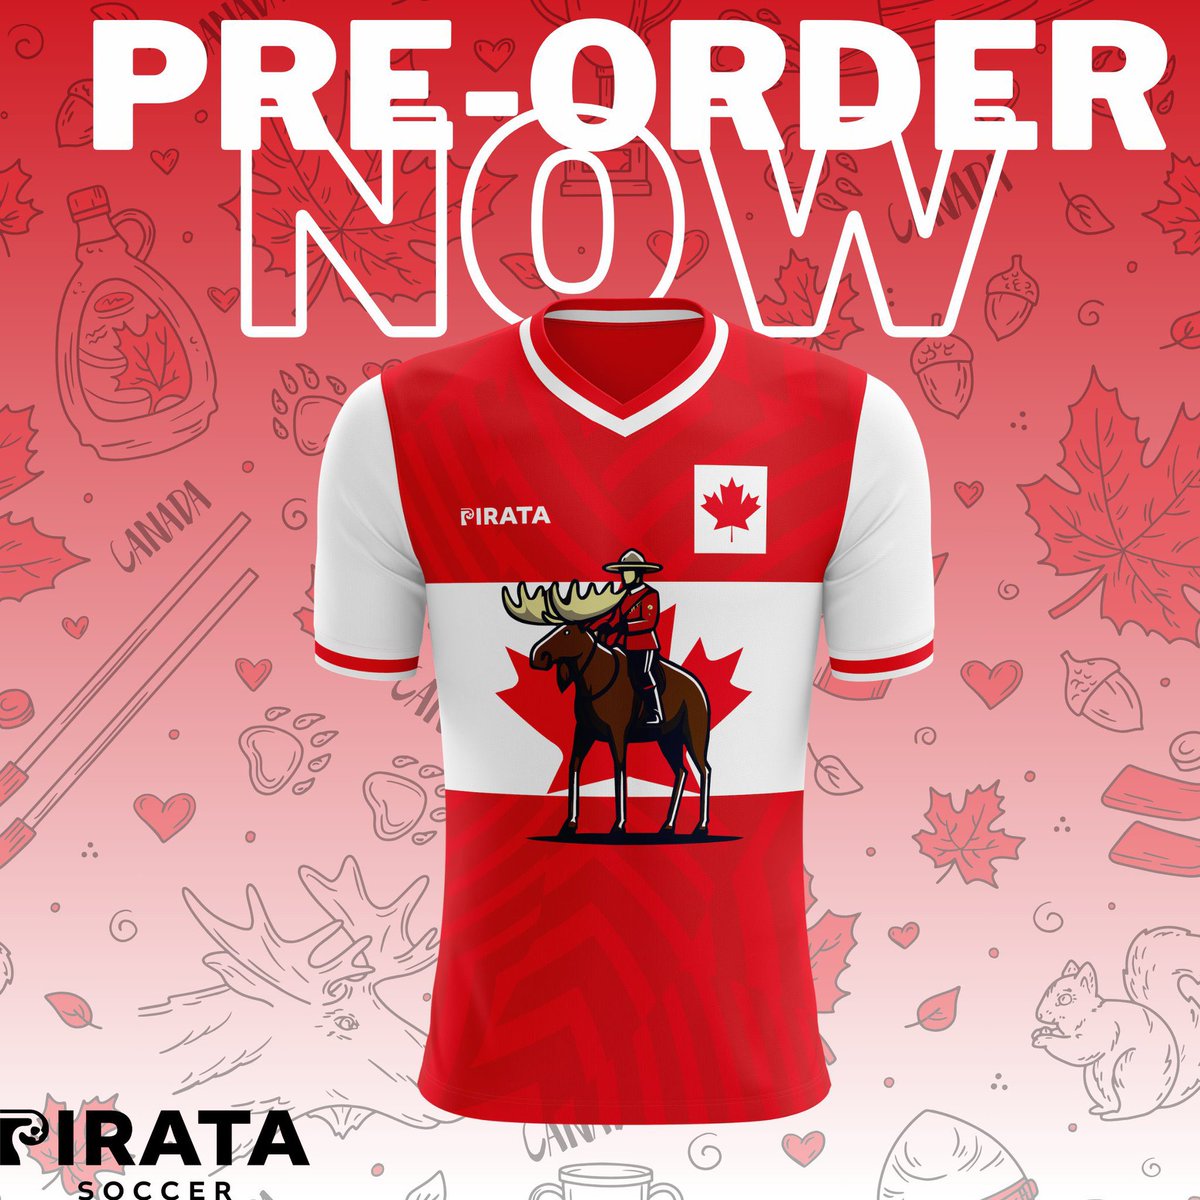 🚨 It’s a 🇨🇦 🫎 Giveaway! 1️⃣ follow @Pirata_Soccer 2️⃣ RT this! 3️⃣ 🤞 One lucky winner chosen tomorrow. And if you can’t wait - Flash pre-sale! 4 days only! bit.ly/3xoCaaE